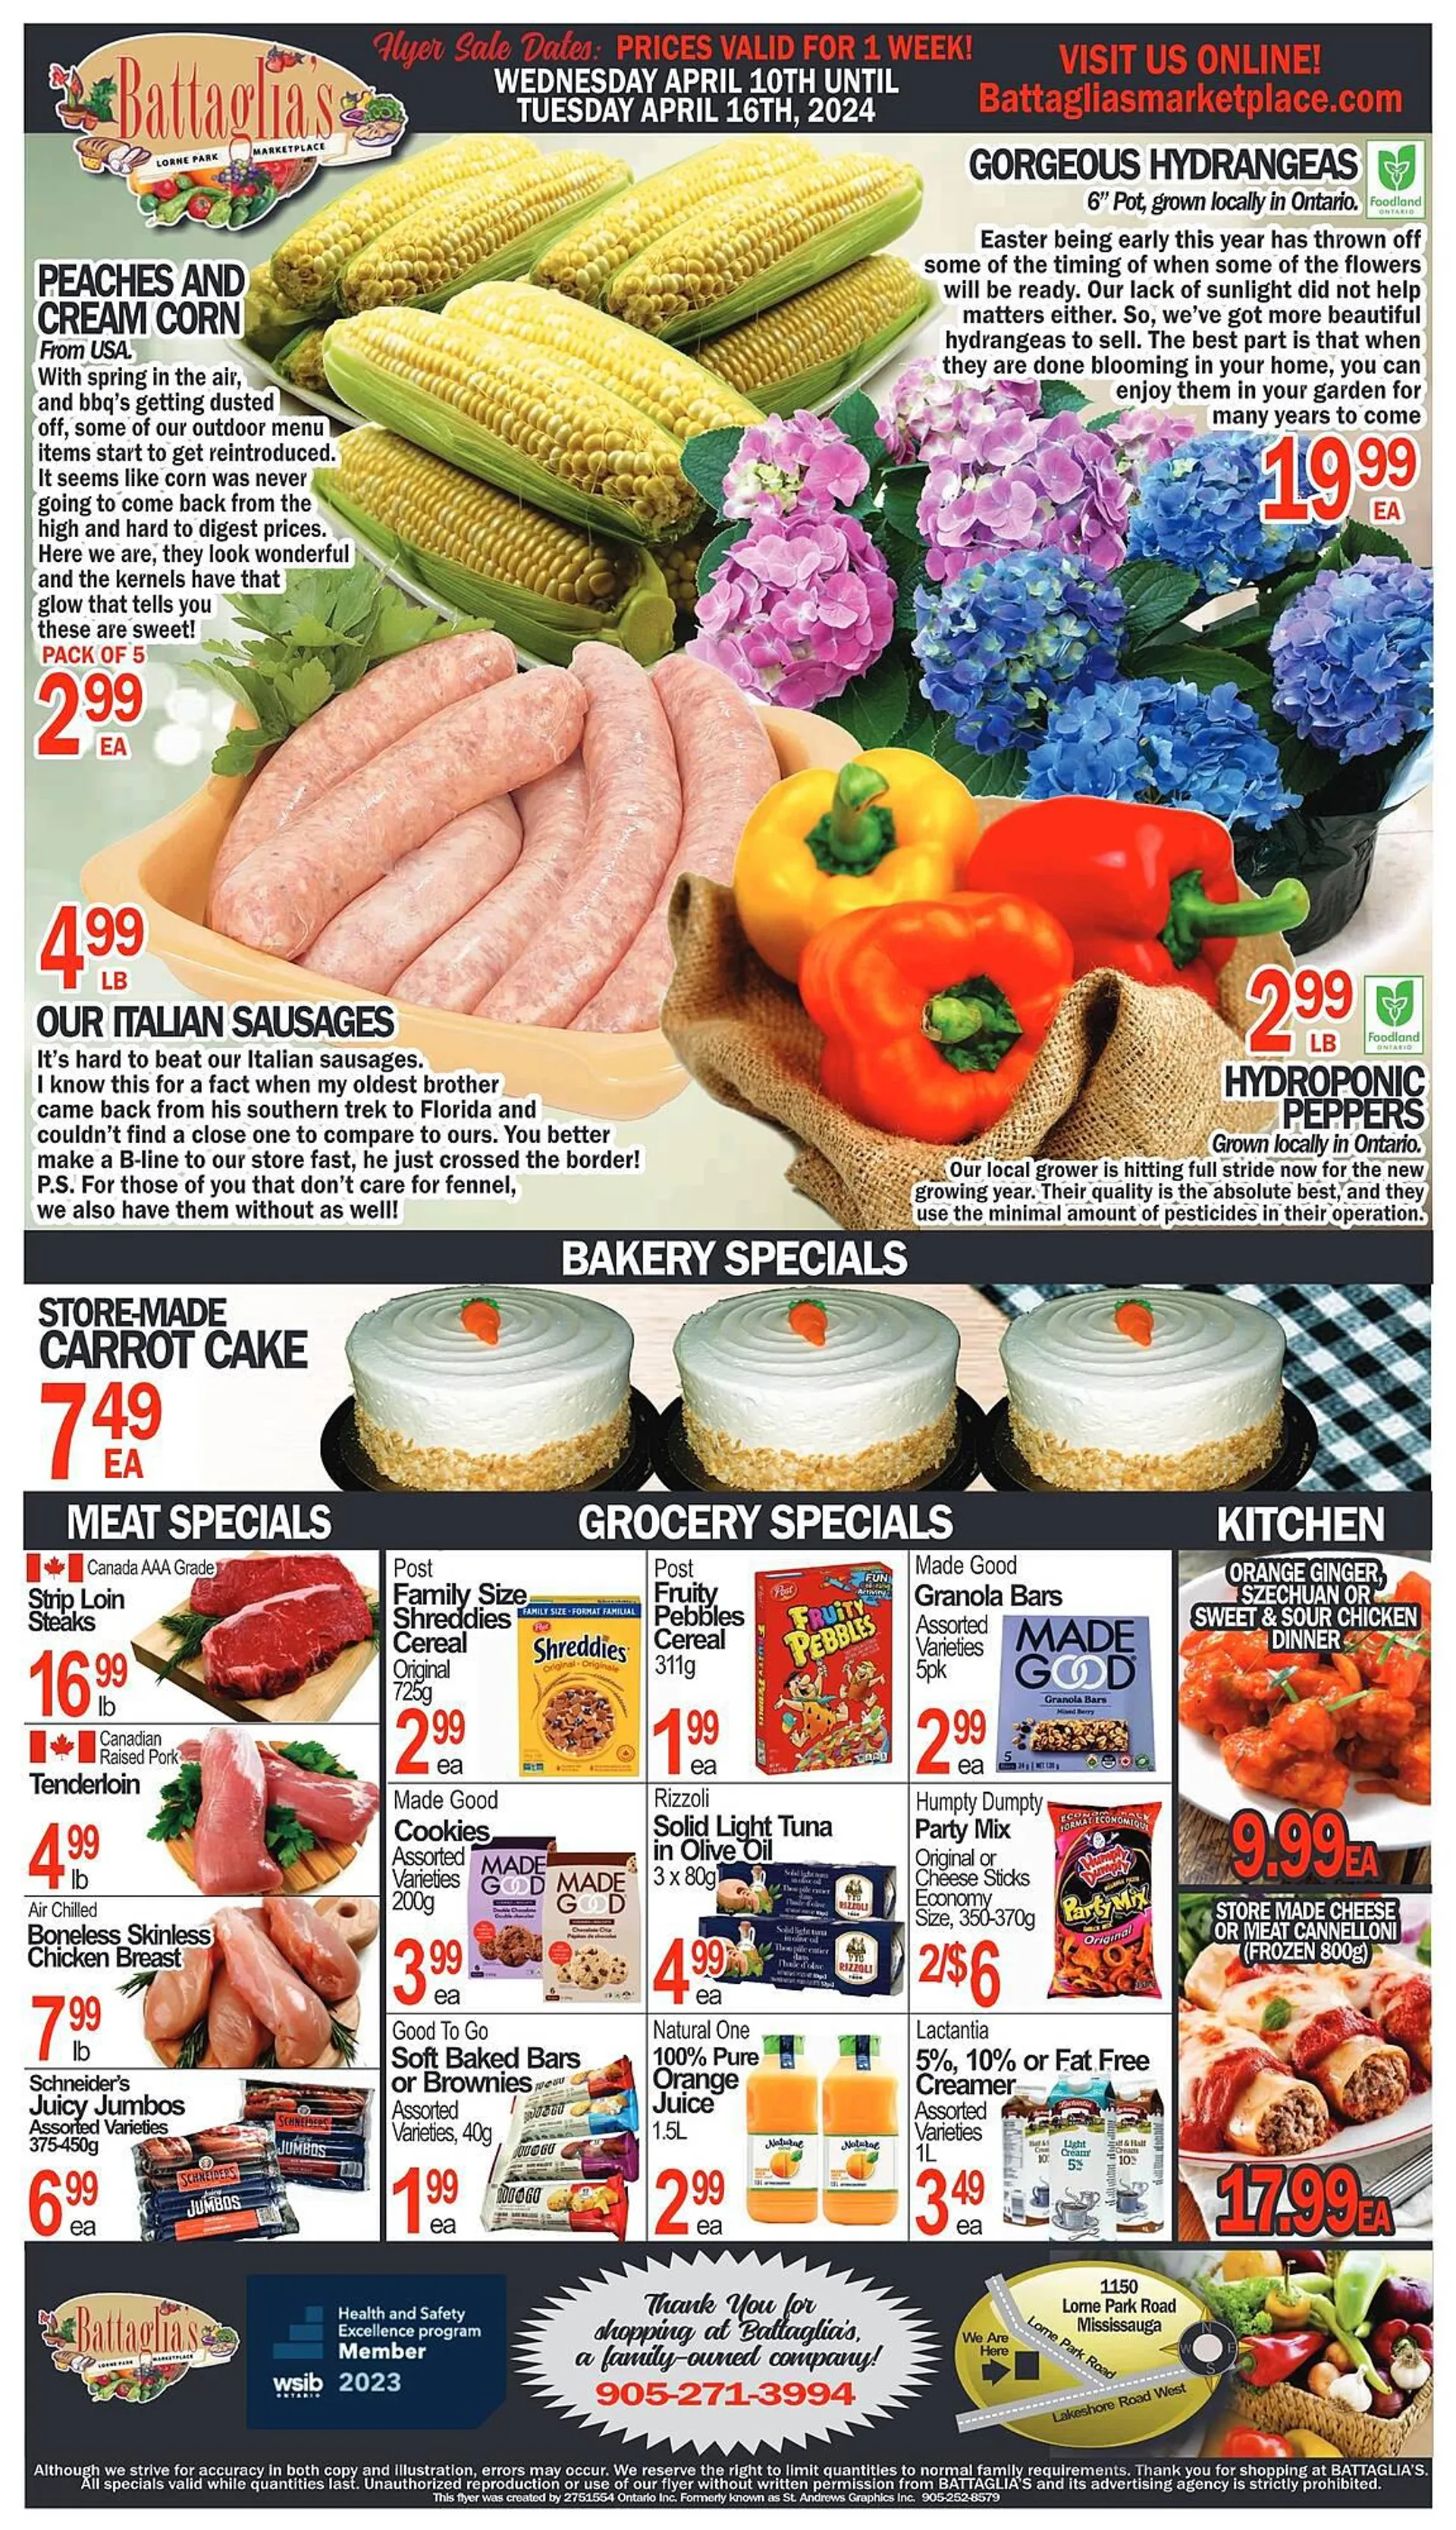 Battaglia's Marketplace flyer from April 10 to April 23 2024 - flyer page 1